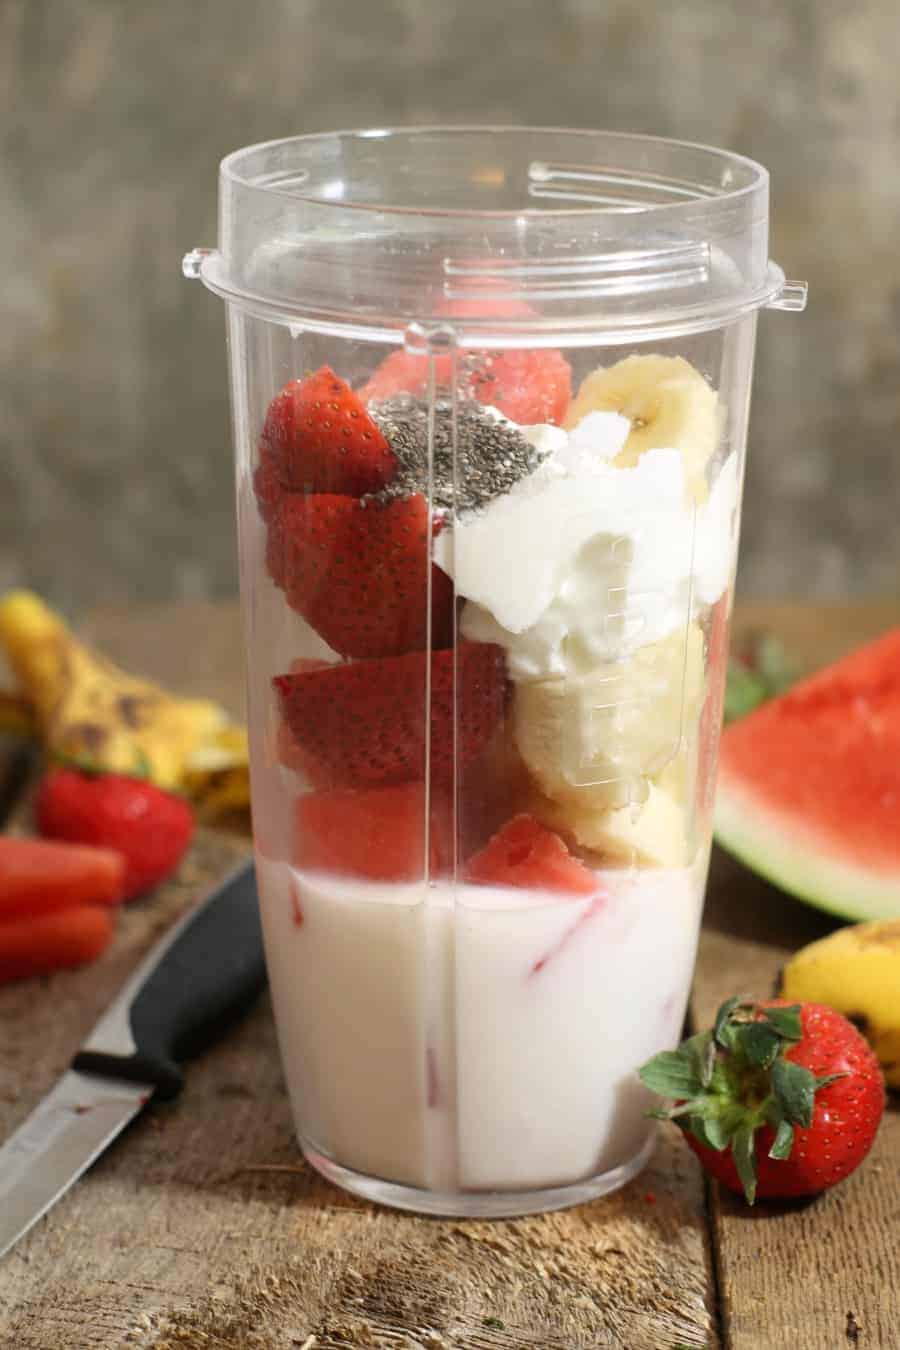 Ingredients for a Strawberry banana watermelon smoothie in a blender cup